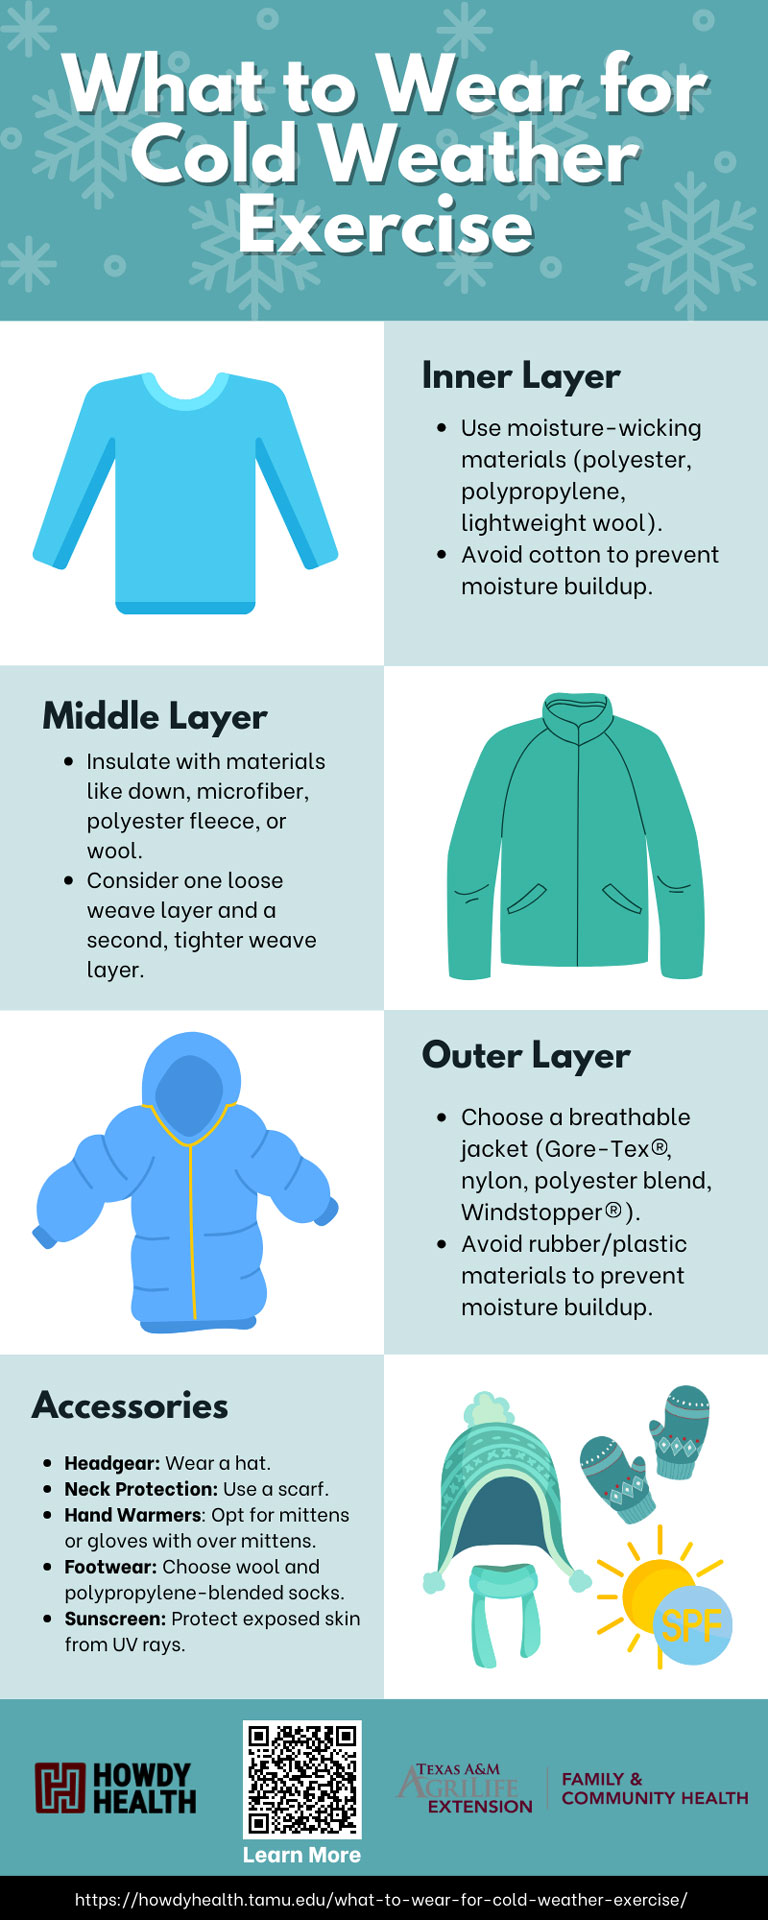 What to Wear for Cold Weather Exercise | Howdy Health